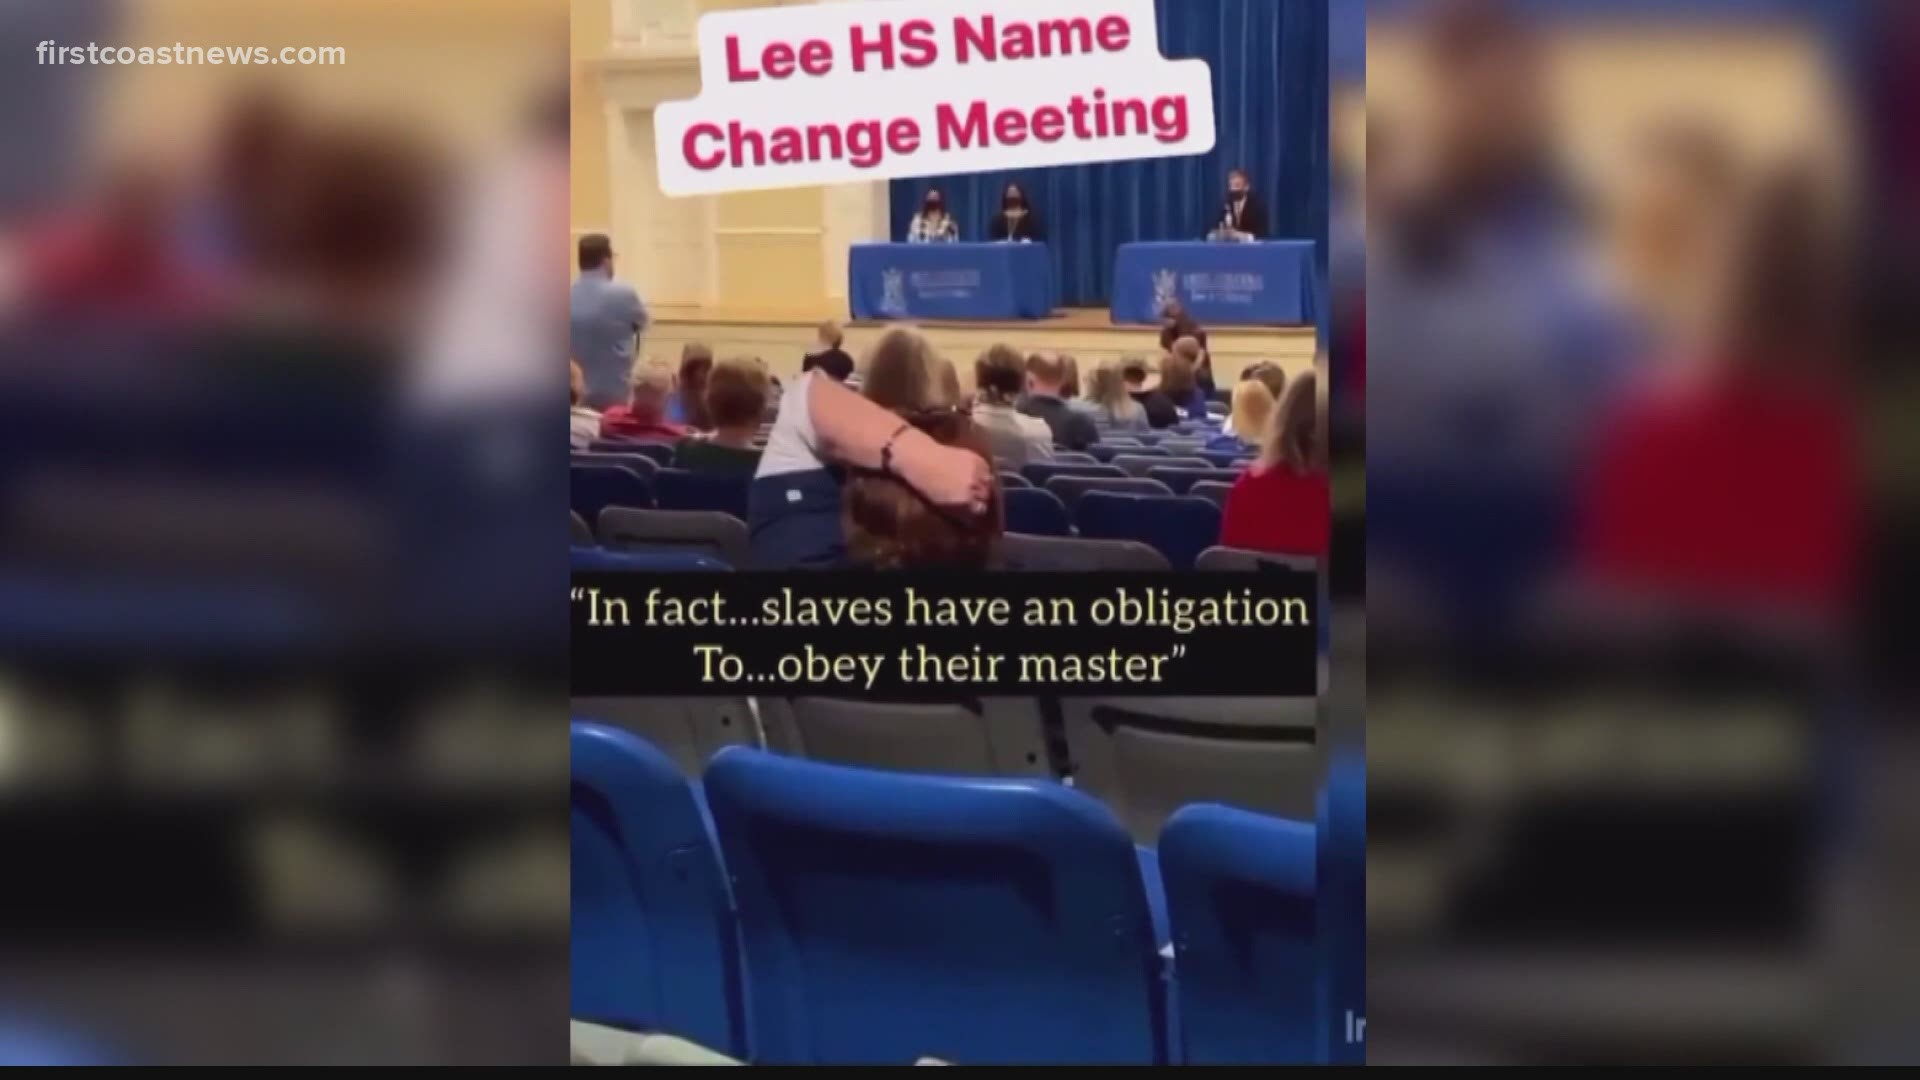 Many people came out after a viral video in which one alumnus said "slaves have an obligation to obey their masters."